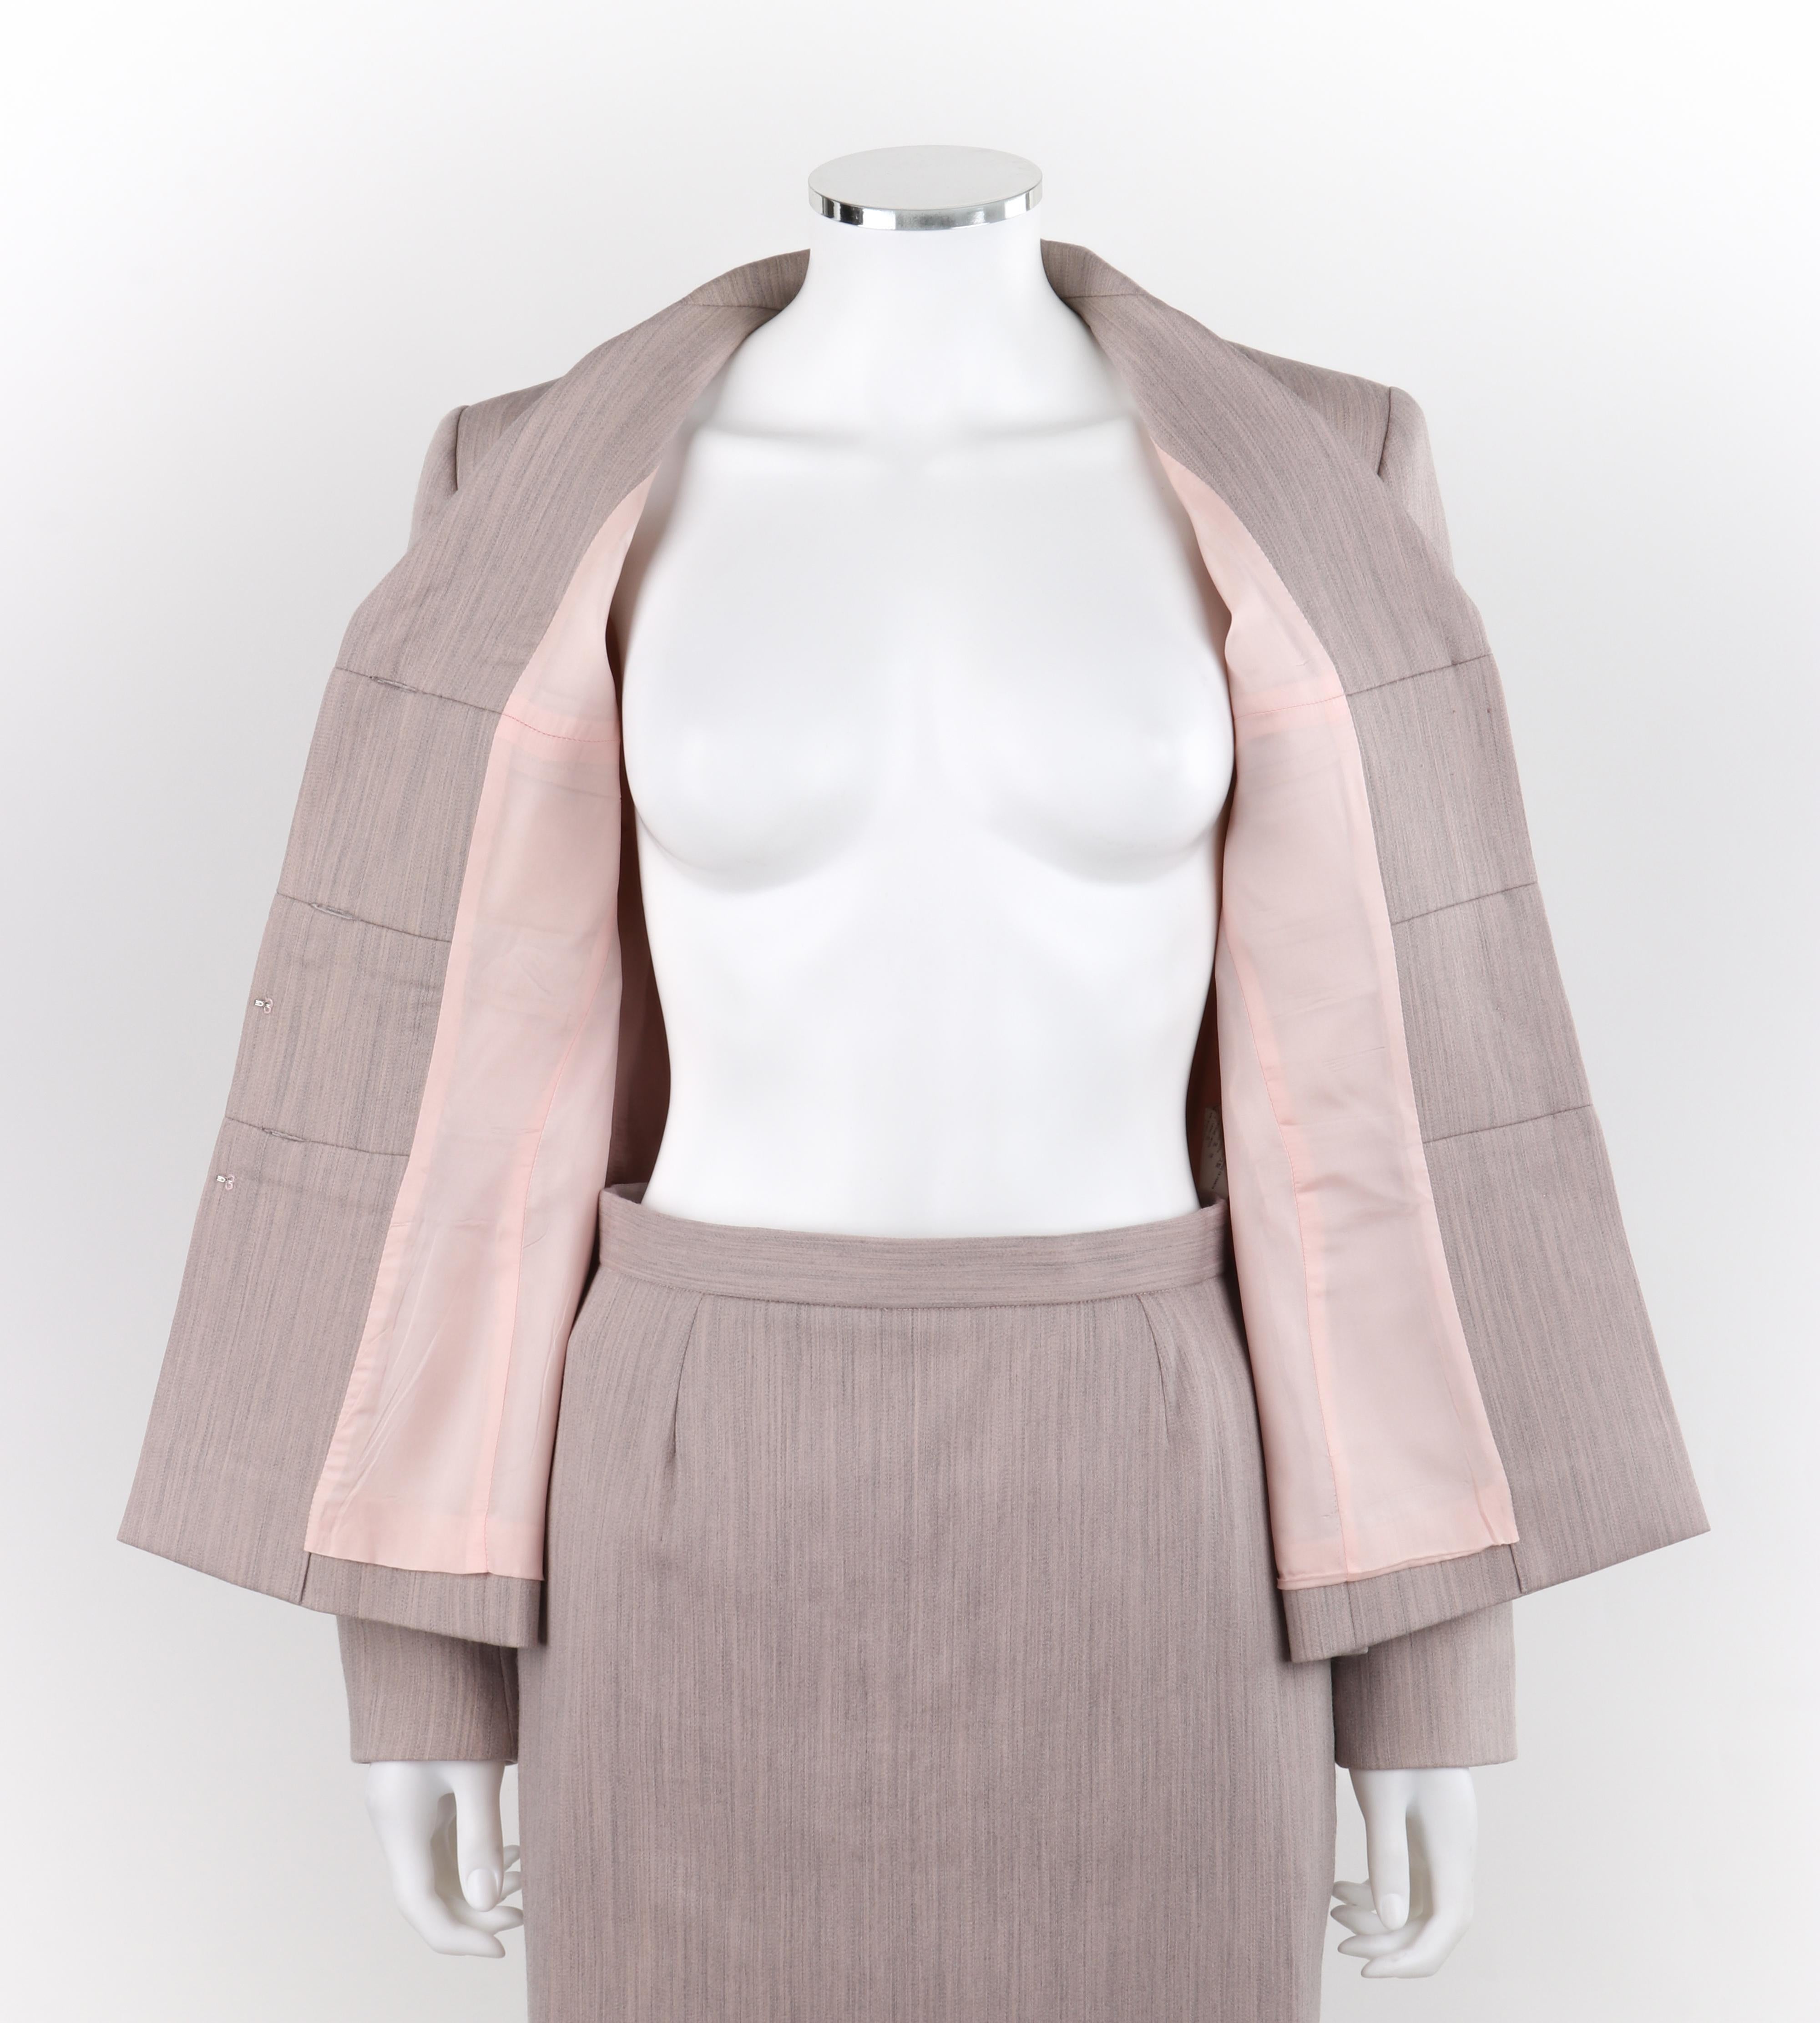 Women's GIVENCHY Couture A/W 1998 ALEXANDER McQUEEN 2pc Tailored Blazer Skirt Suit Set For Sale